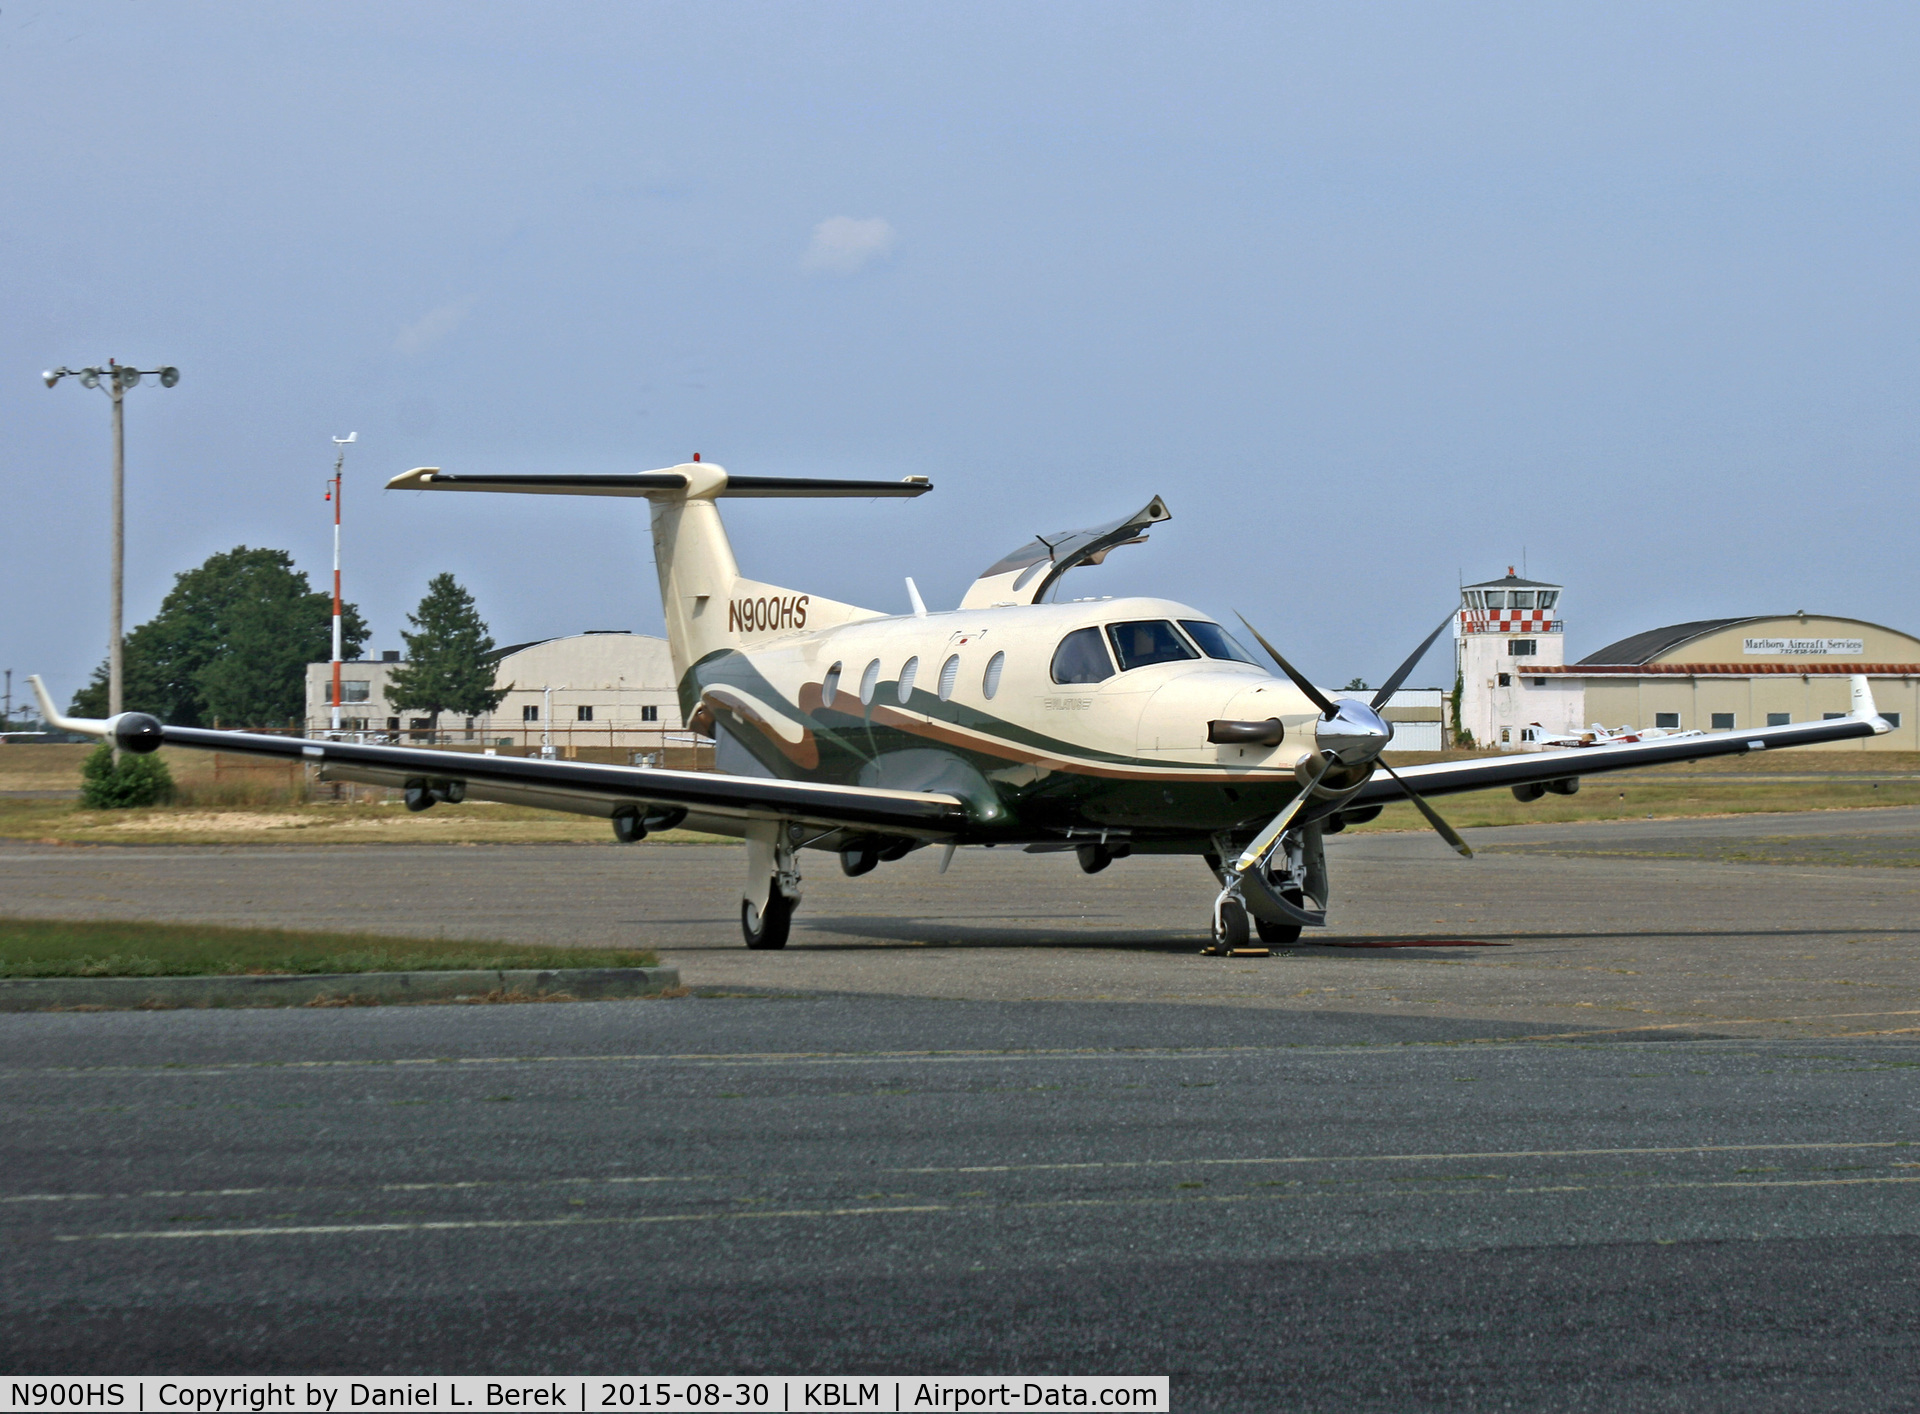 N900HS, 1996 Pilatus PC-12 C/N 136, This Swiss single-engine turboprop loads up for another trip.